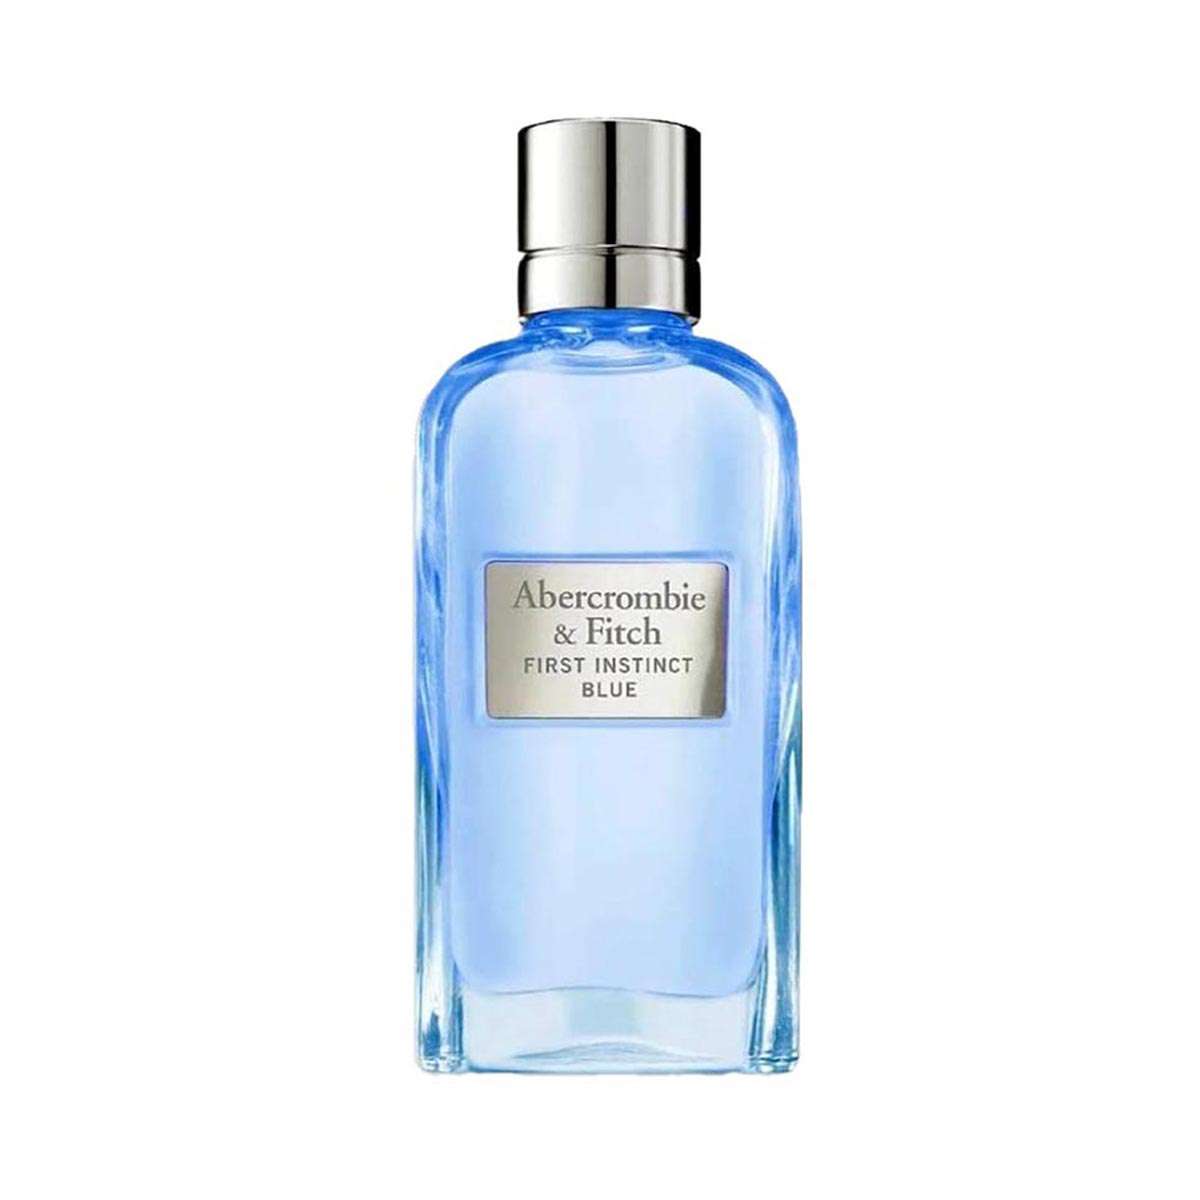 — Buy Abercrombie & Fitch First Instinct Blue